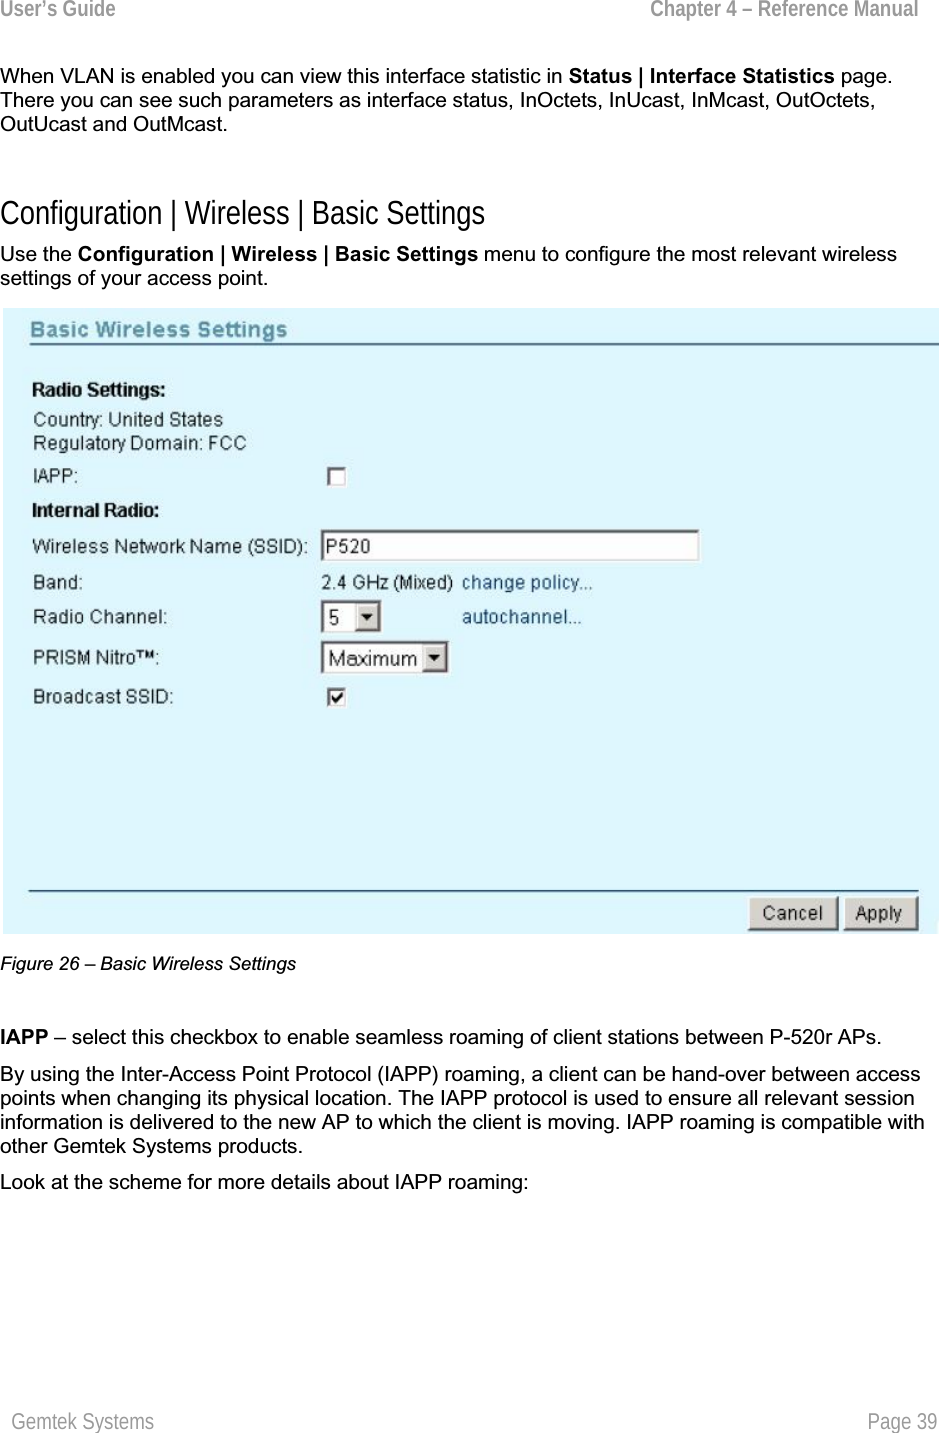 User’s Guide  Chapter 4 – Reference ManualWhen VLAN is enabled you can view this interface statistic in Status | Interface Statistics page.There you can see such parameters as interface status, InOctets, InUcast, InMcast, OutOctets,OutUcast and OutMcast.Configuration | Wireless | Basic Settings Use the Configuration | Wireless | Basic Settings menu to configure the most relevant wirelesssettings of your access point.Figure 26 – Basic Wireless Settings IAPP – select this checkbox to enable seamless roaming of client stations between P-520r APs. By using the Inter-Access Point Protocol (IAPP) roaming, a client can be hand-over between accesspoints when changing its physical location. The IAPP protocol is used to ensure all relevant session information is delivered to the new AP to which the client is moving. IAPP roaming is compatible with other Gemtek Systems products.Look at the scheme for more details about IAPP roaming: Gemtek Systems  Page 39